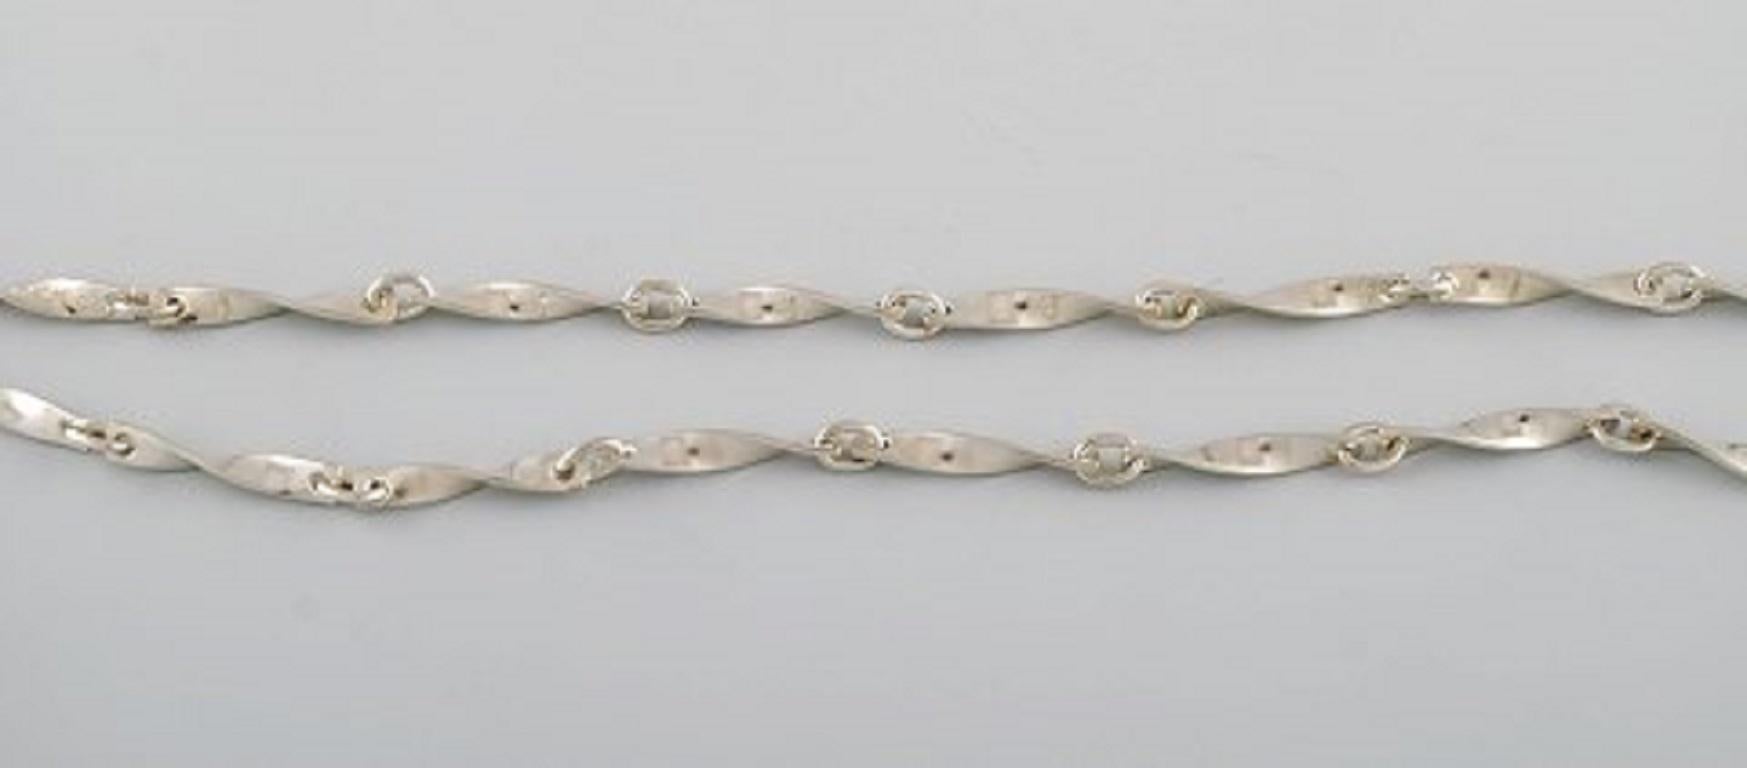 Modernist Georg Jensen necklace in sterling silver. 20th century.
Width: 3 mm.
Total length: 76 cm.
In very good condition.
Stamped.
